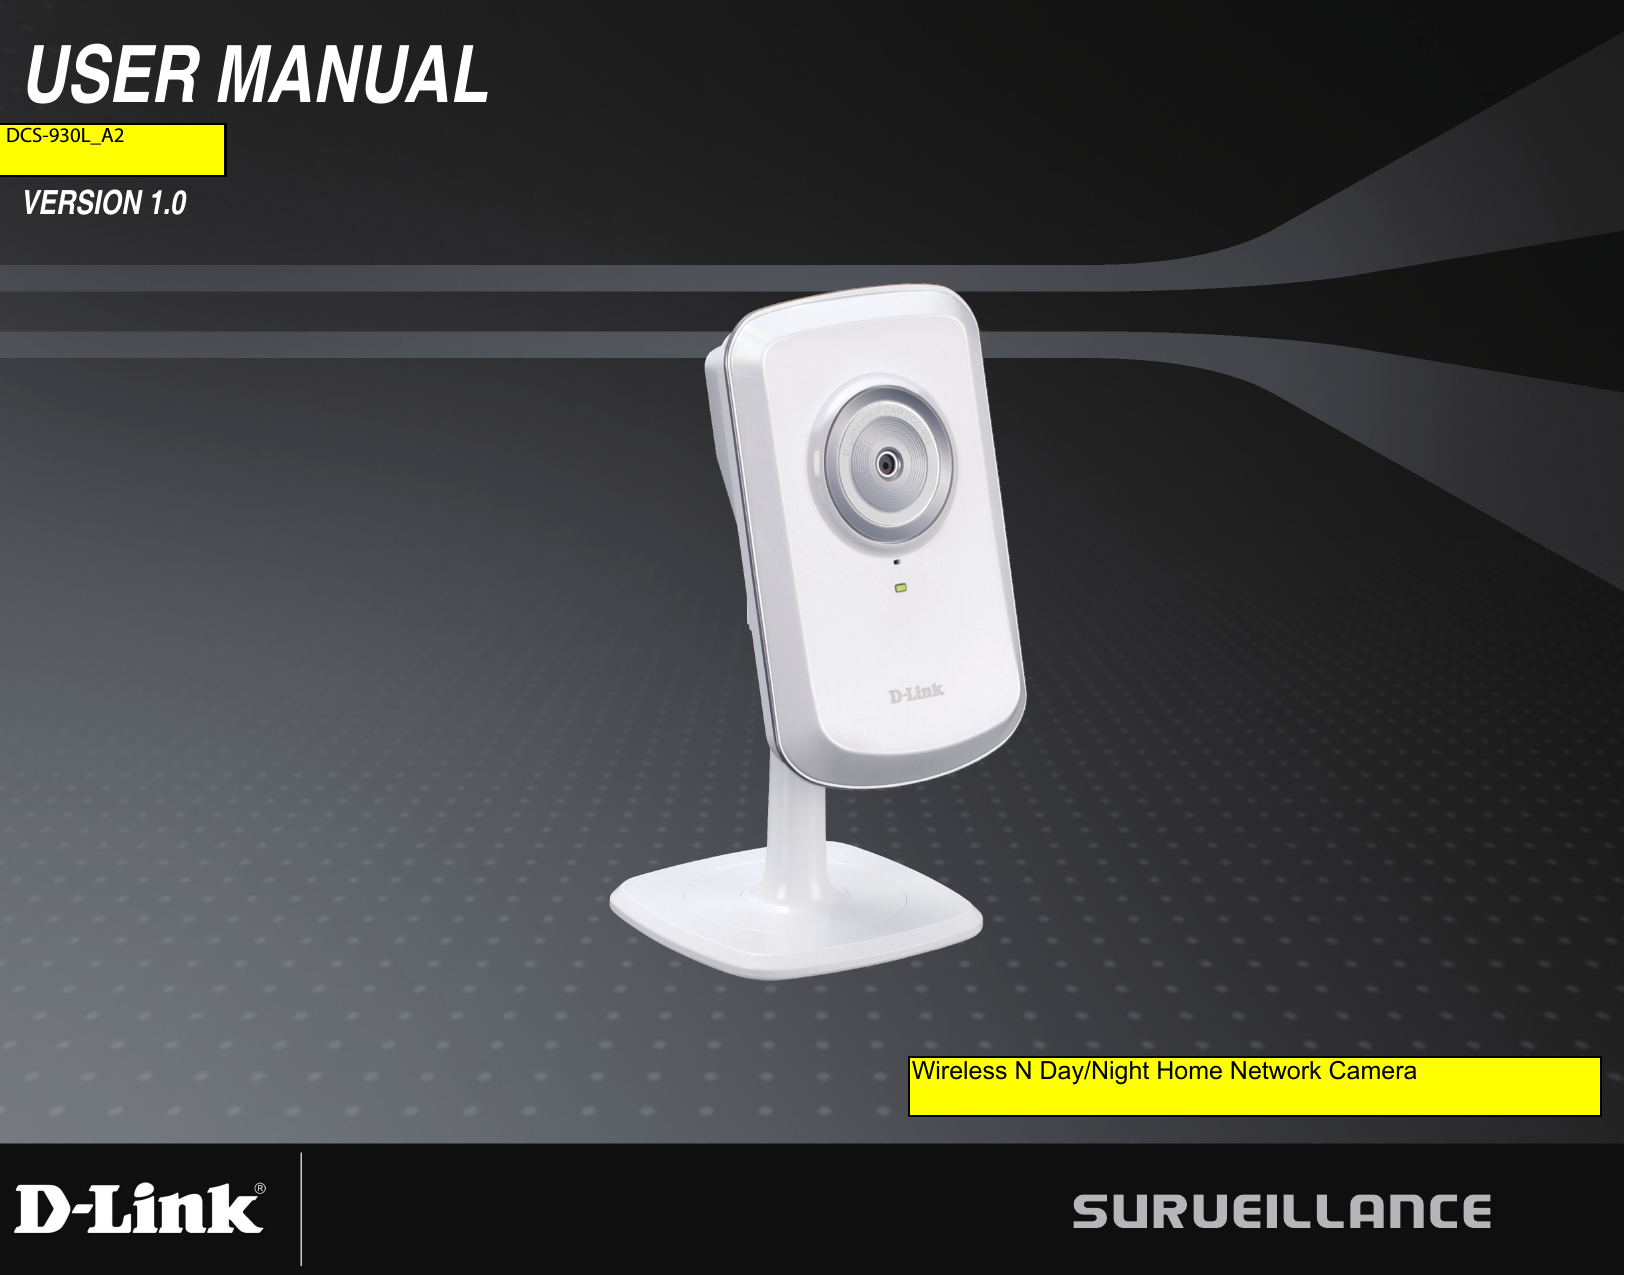 USER MANUALDCS-930VERSION 1.0 DCS-930L_A2 Wireless N Day/Night Home Network Camera